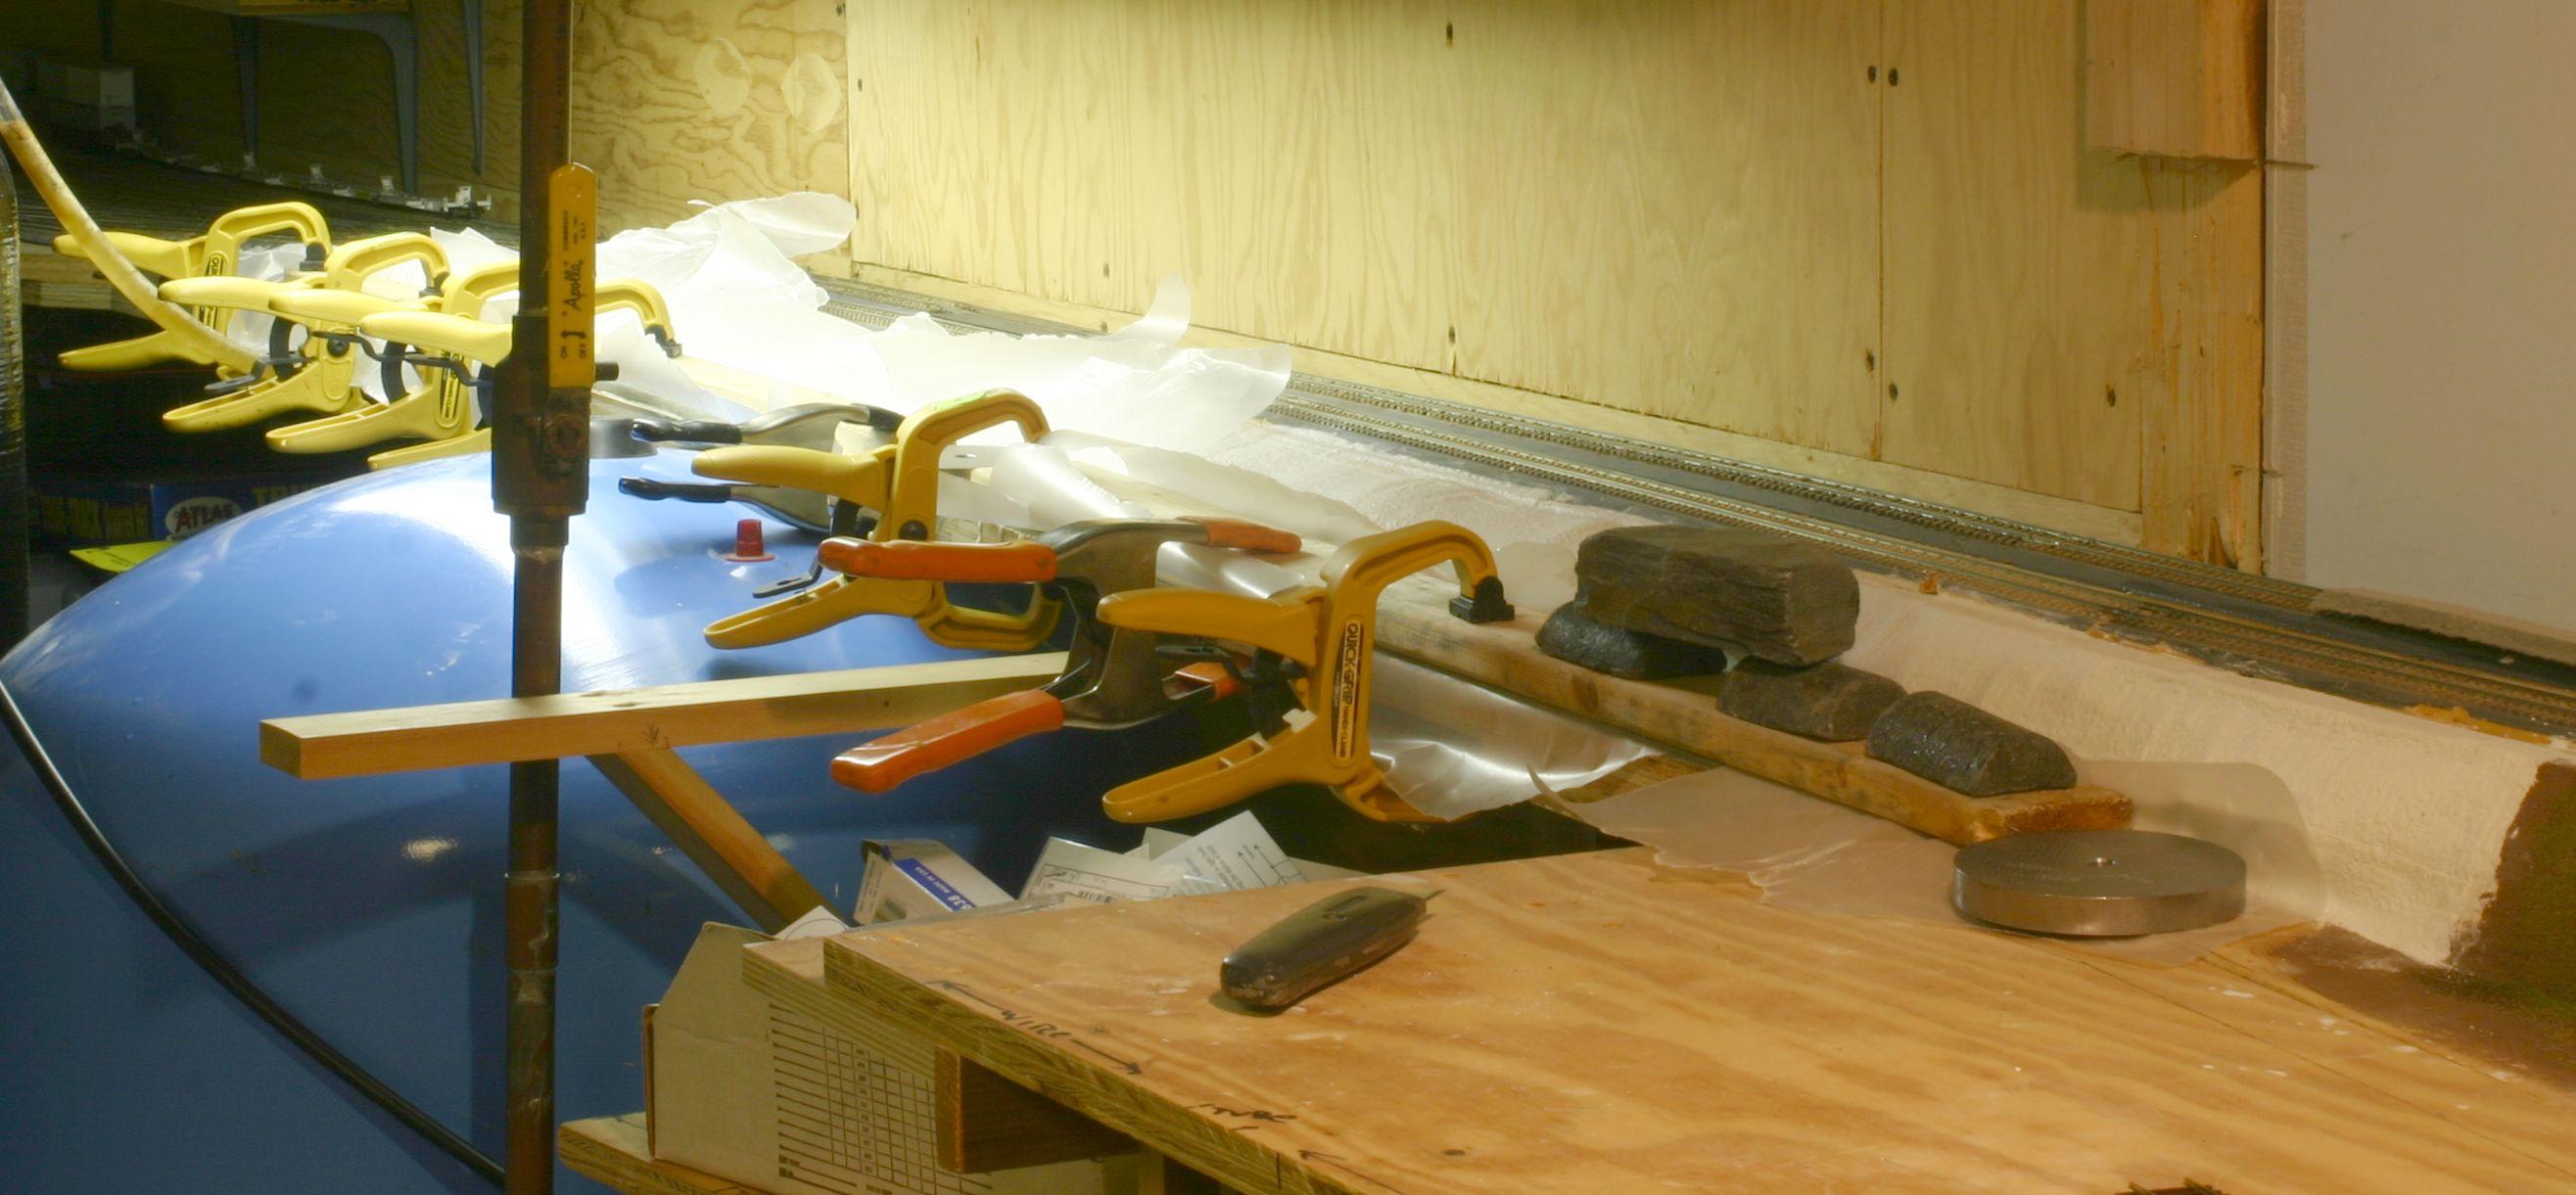 Homa-bed clamped in place after gluing